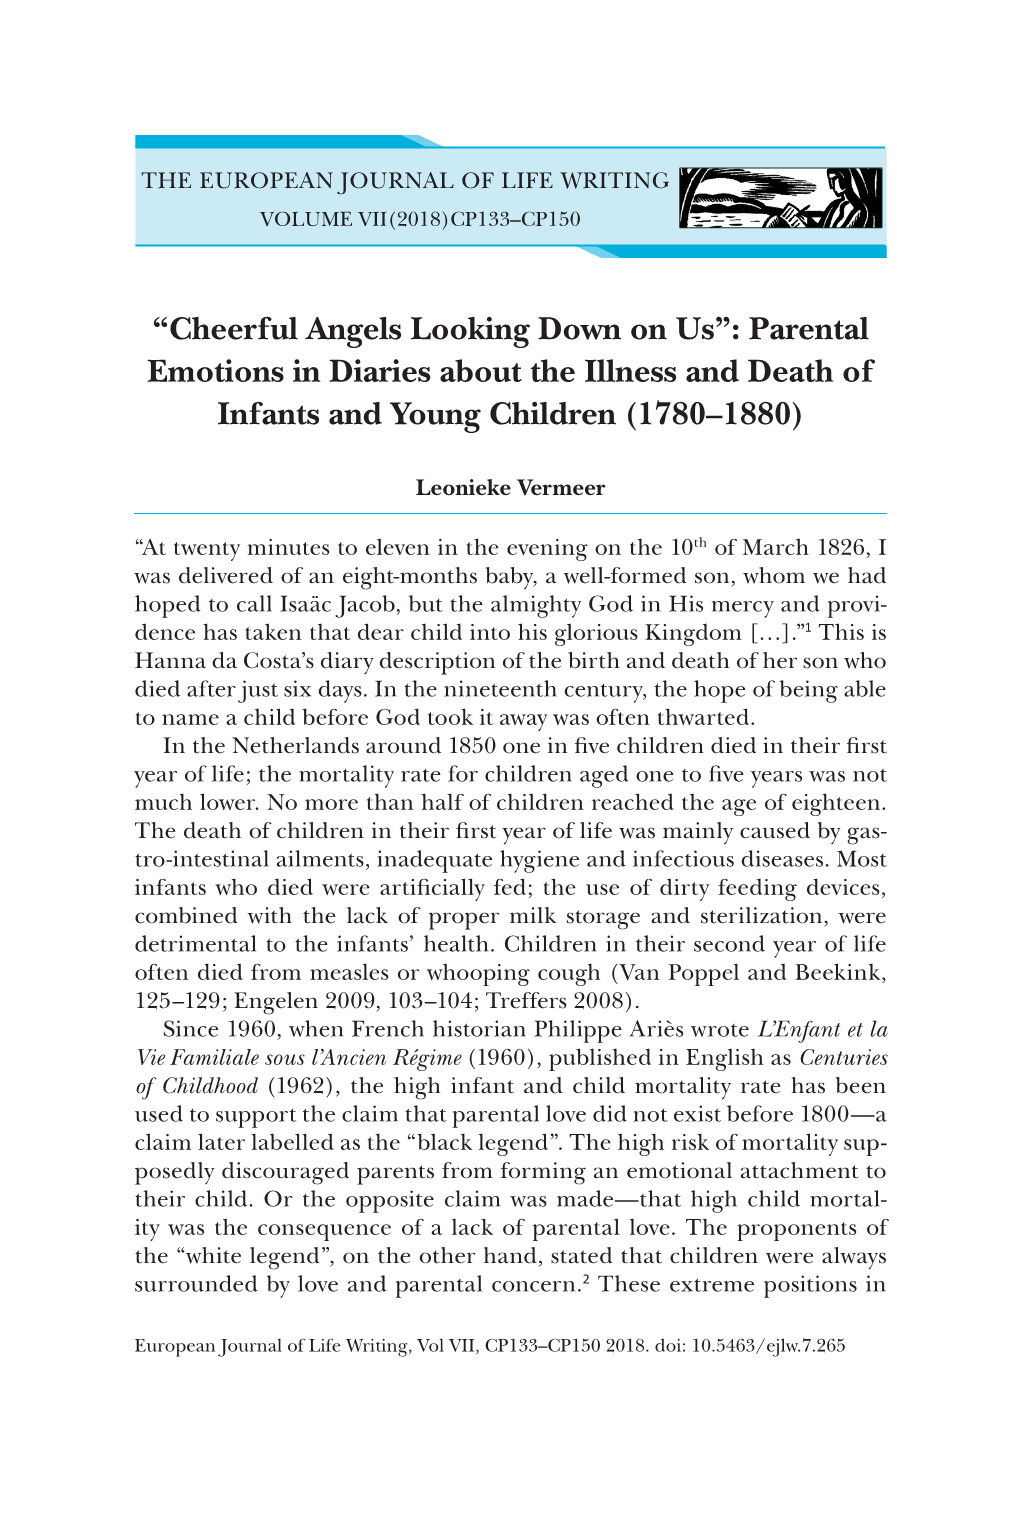 “Cheerful Angels Looking Down on Us”: Parental Emotions in Diaries About the Illness and Death of Infants and Young Children (1780–1880)